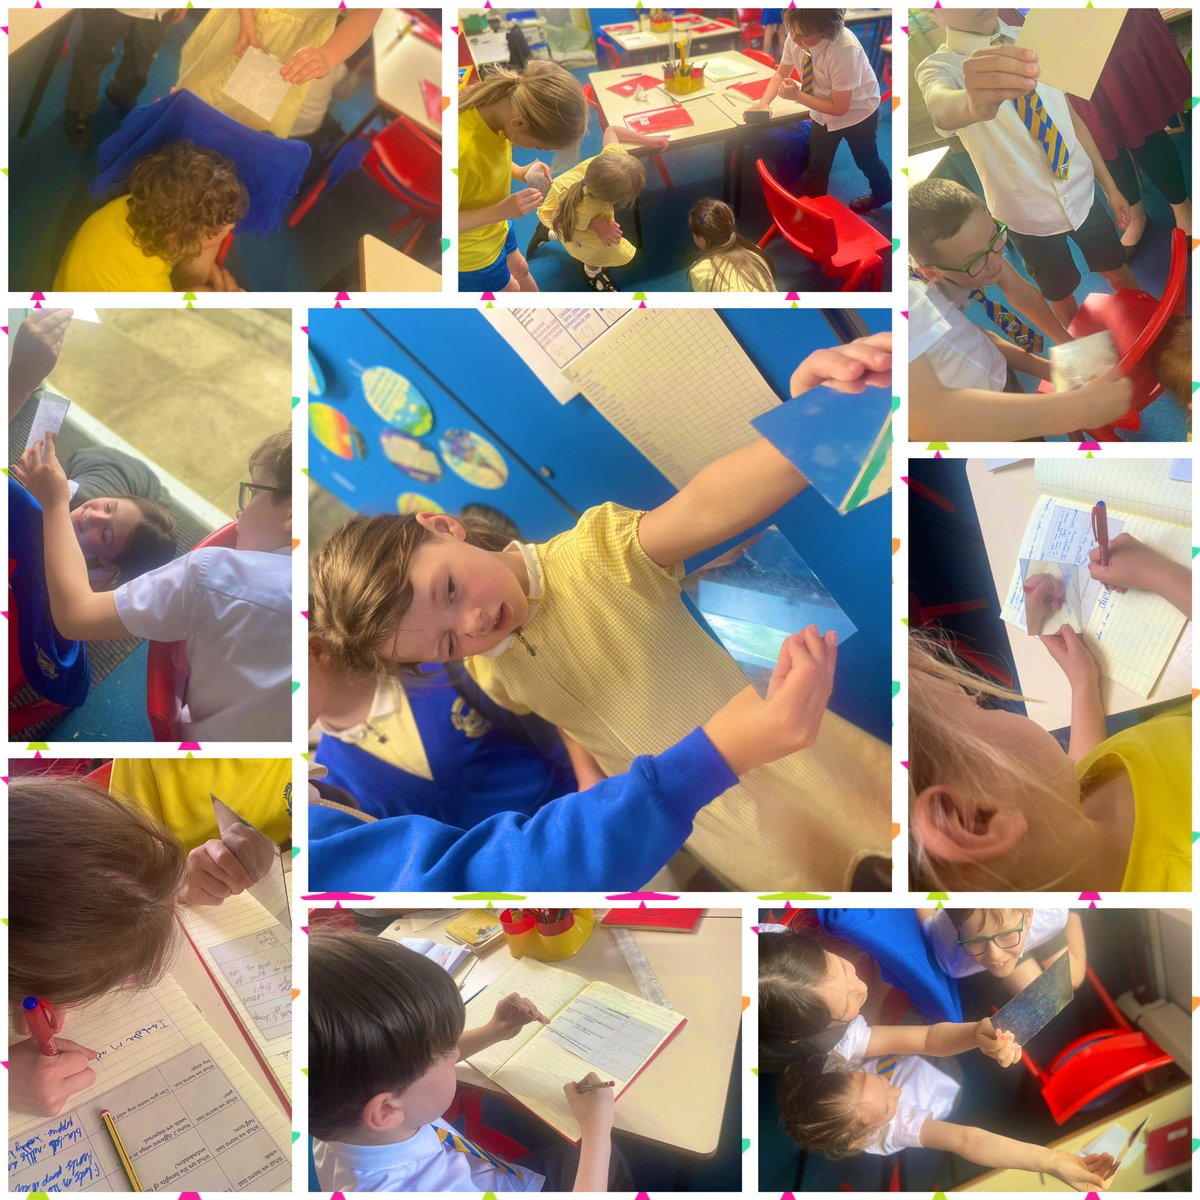 Year 3 have been creating periscopes with mirrors, and investigating how mirrors work. #investigators #scienceisfun #wecanseeroundcorners 🪞